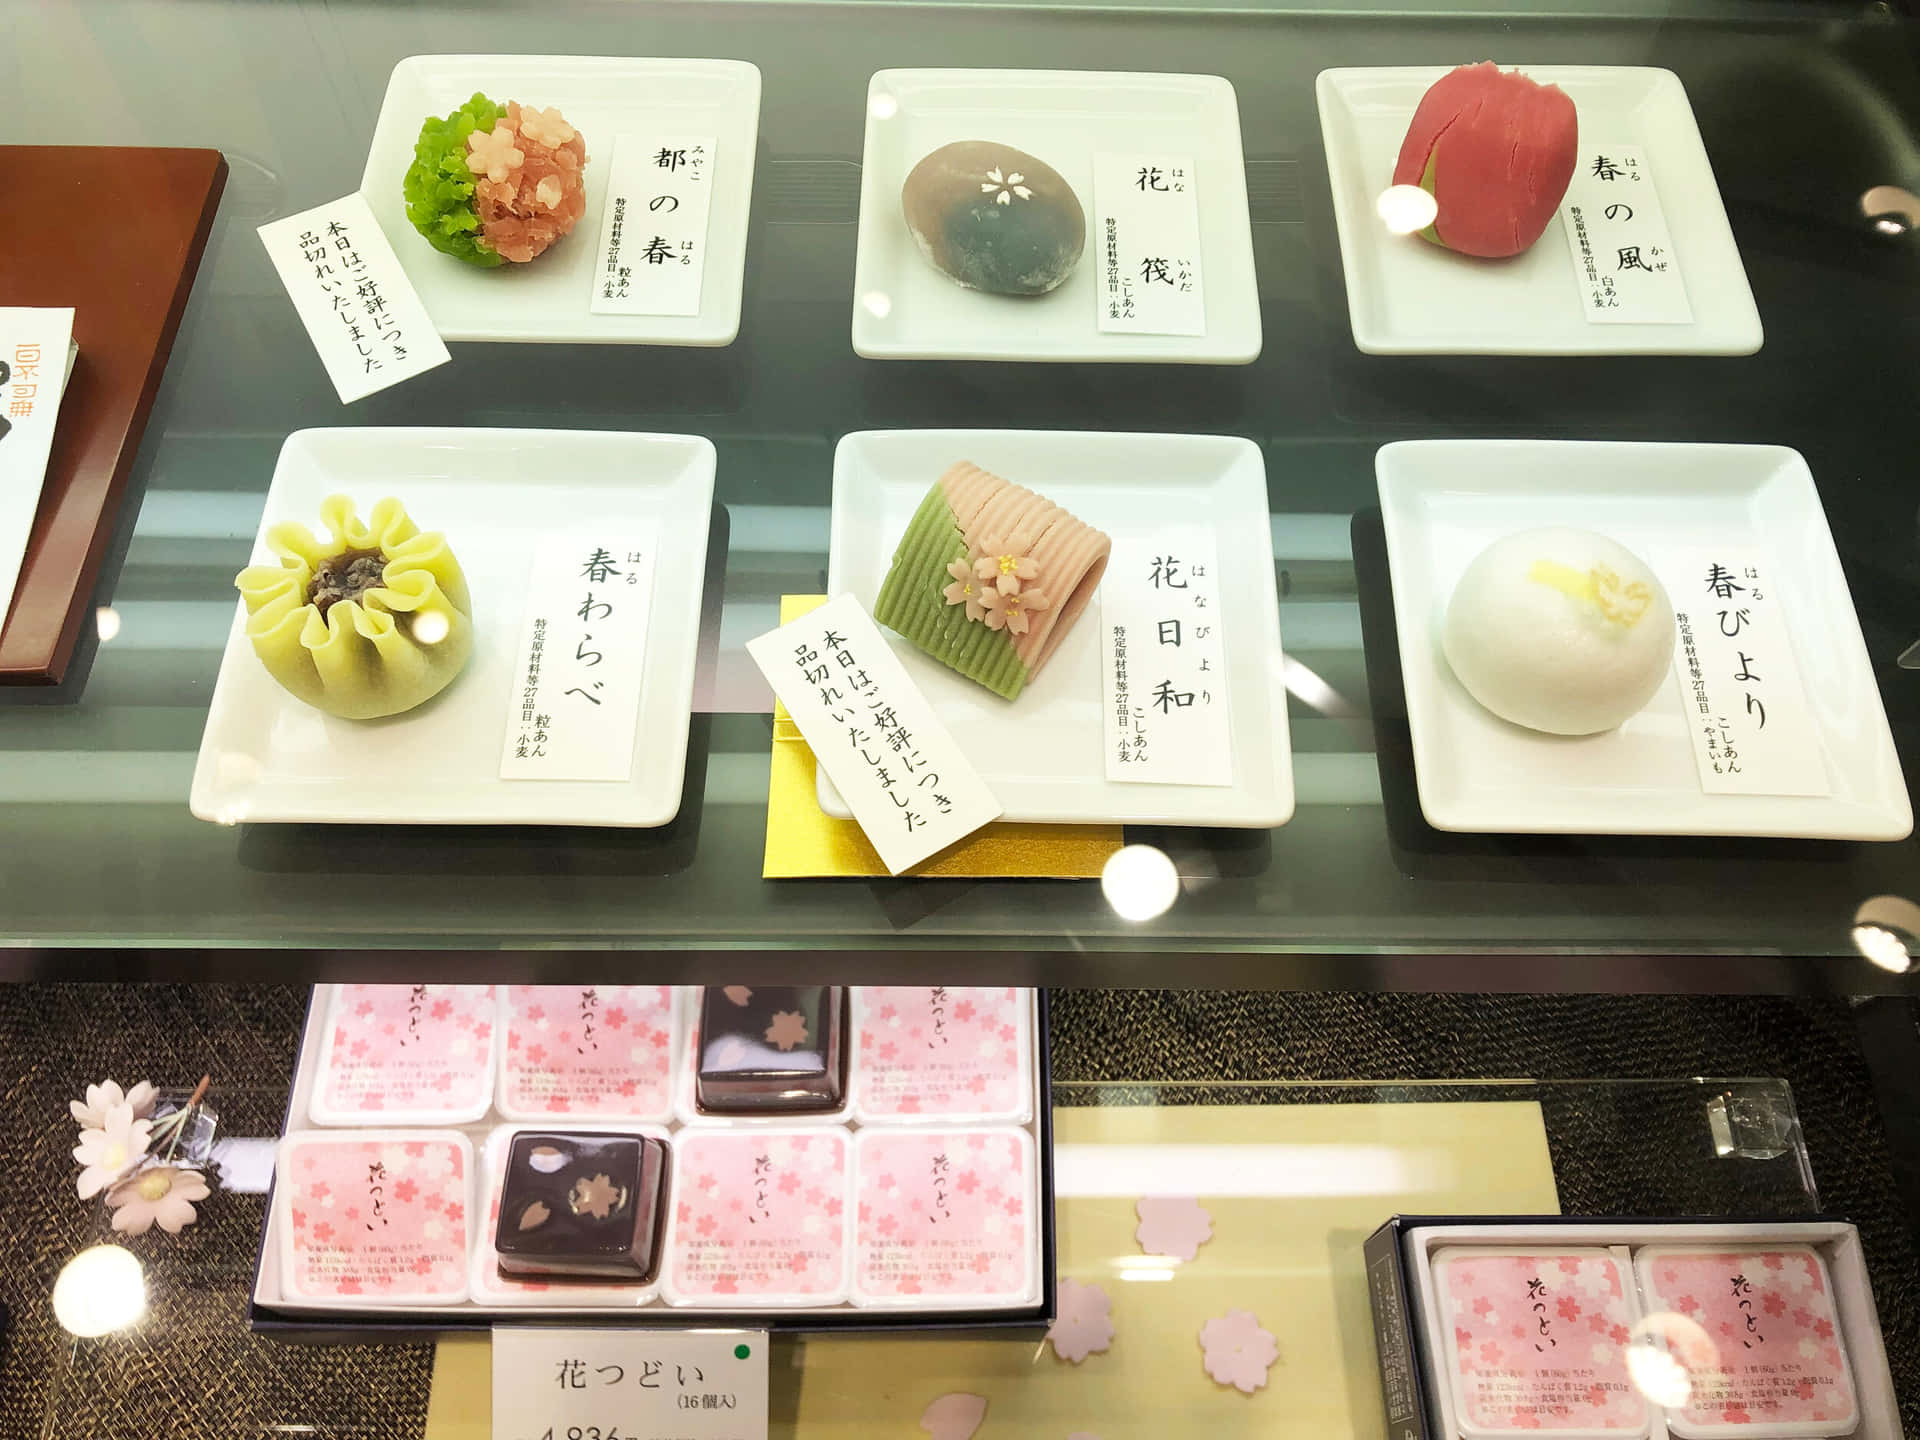 A delectable assortment of Japanese sweets artfully presented on a traditional dish. Wallpaper